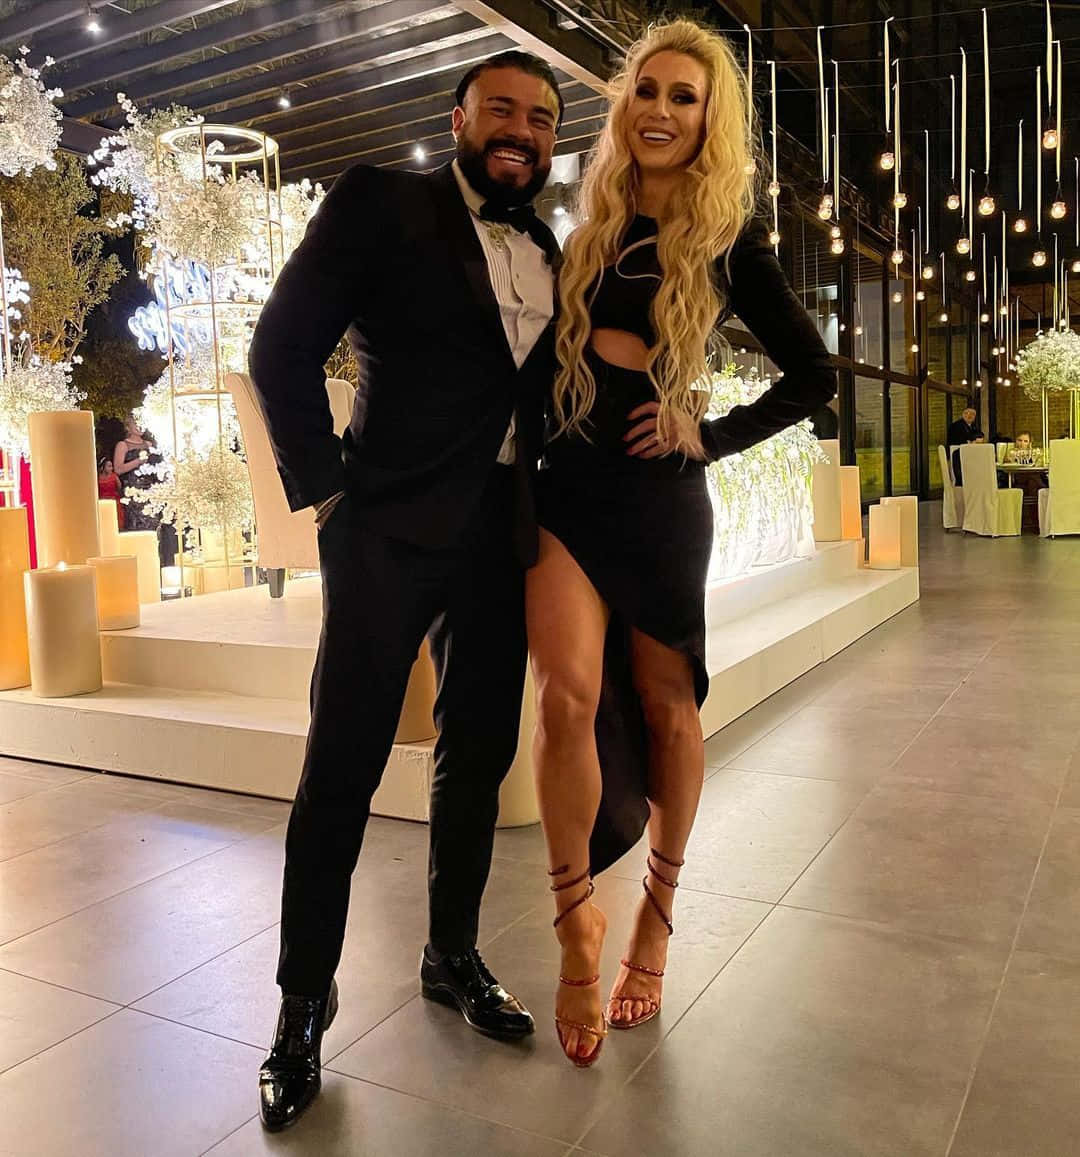 Professional Wrestler Andrade El Idolo with Wife, Charlotte Flair Wallpaper